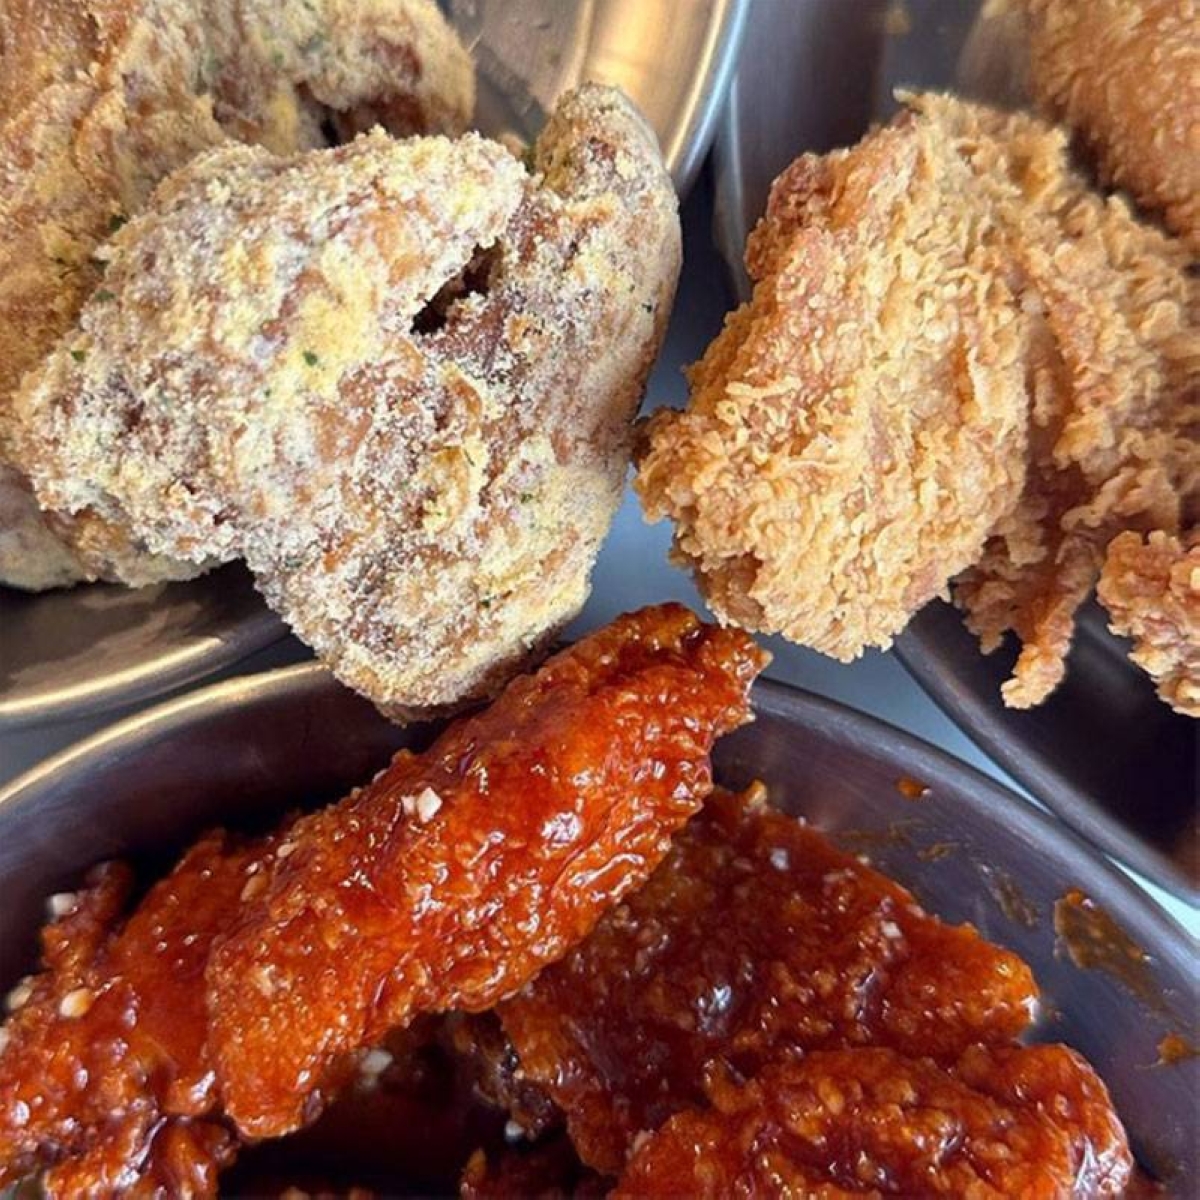 Enjoy the crunchy and crispy offering of bb.q Chicken.